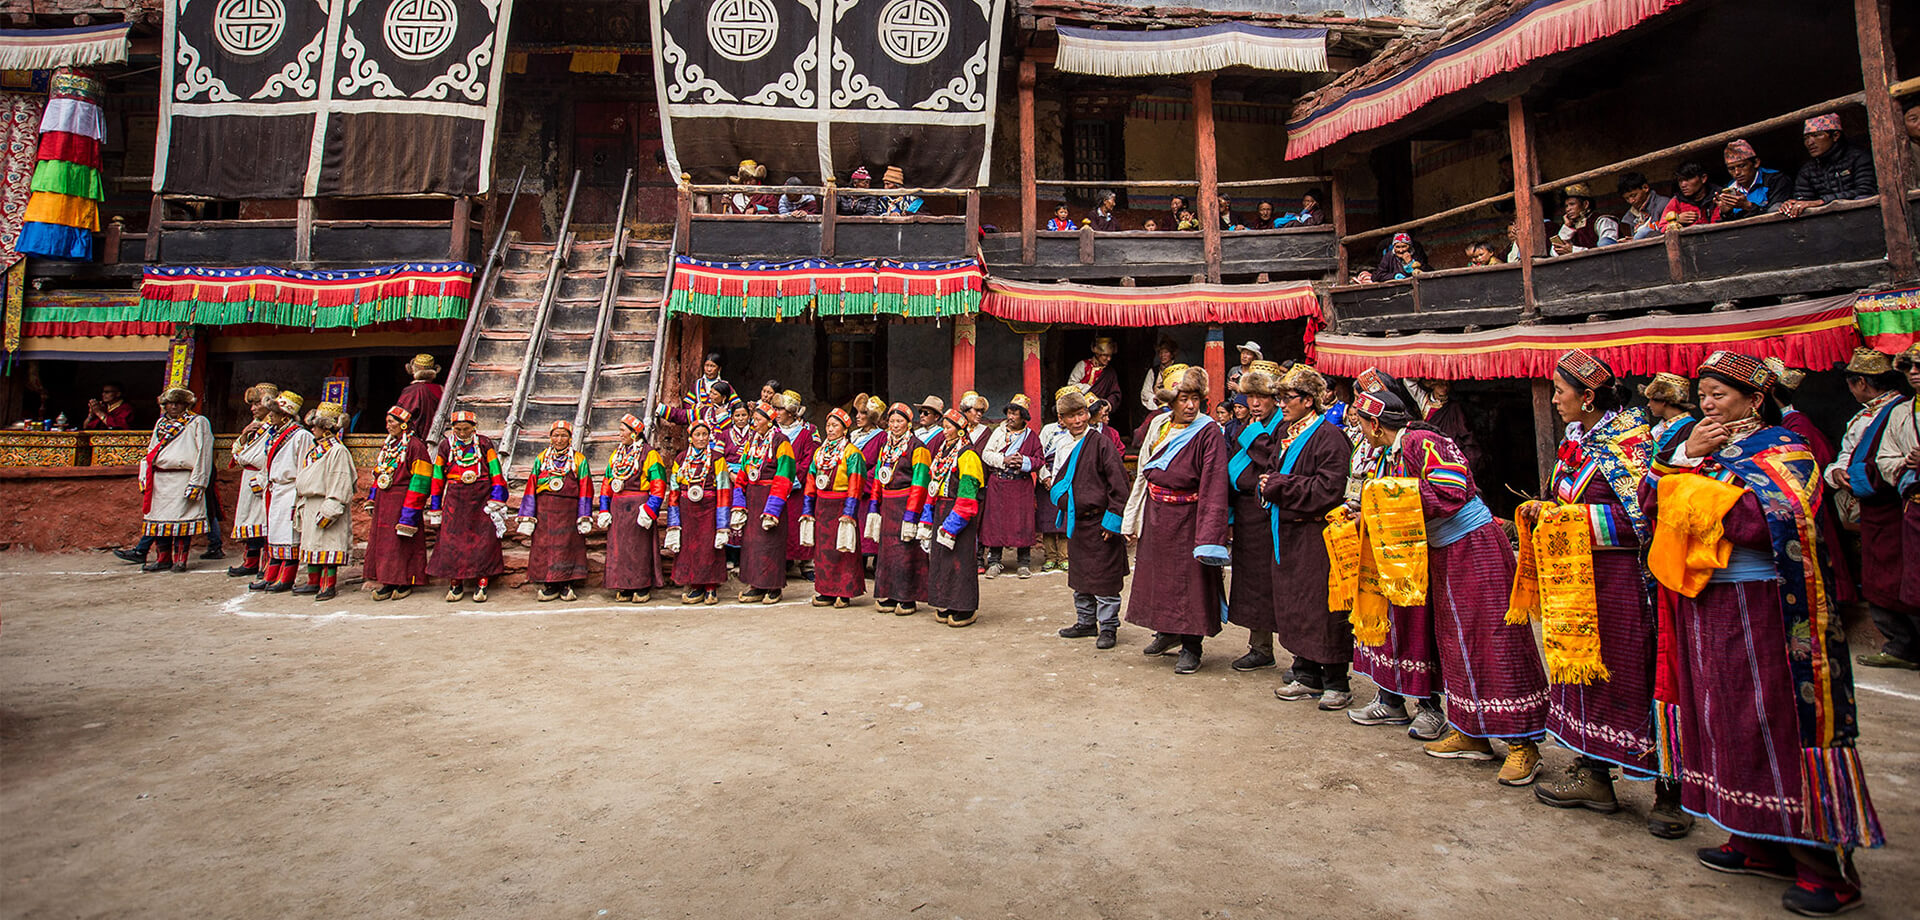 Local people from Humla celebrate Limi festival with traditional attire